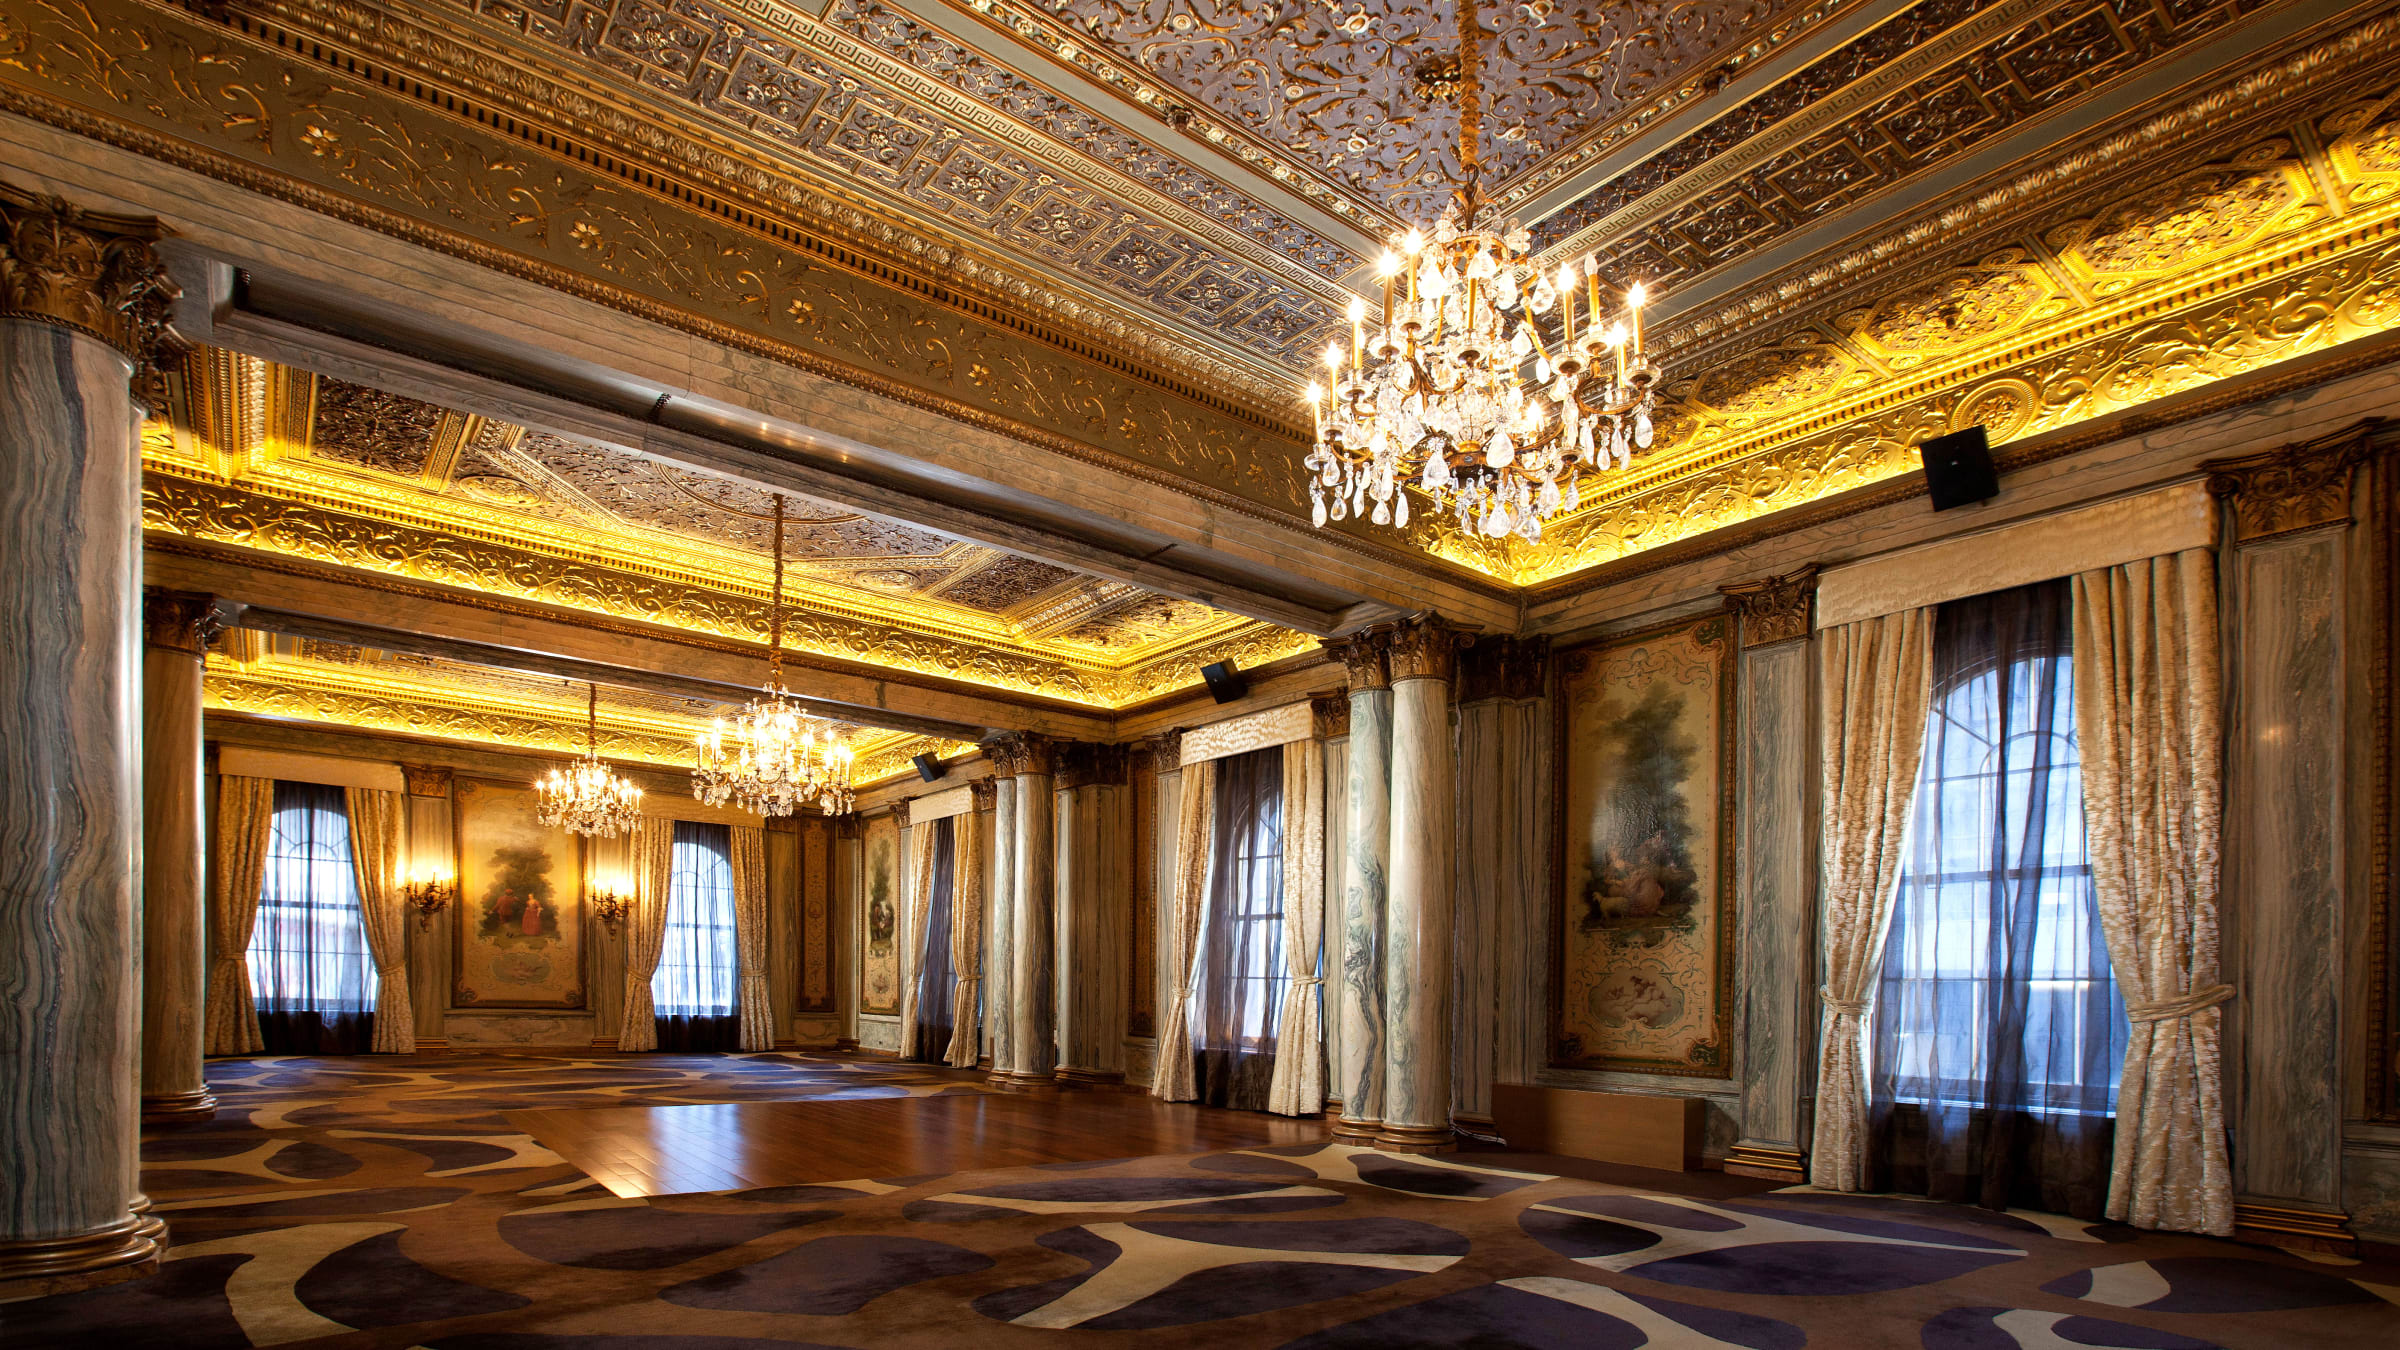 Villard House, the NYC Mansion of Doomed Railroad Tycoon, Now Open for Tours by Lotte New York Palace Hotel photo